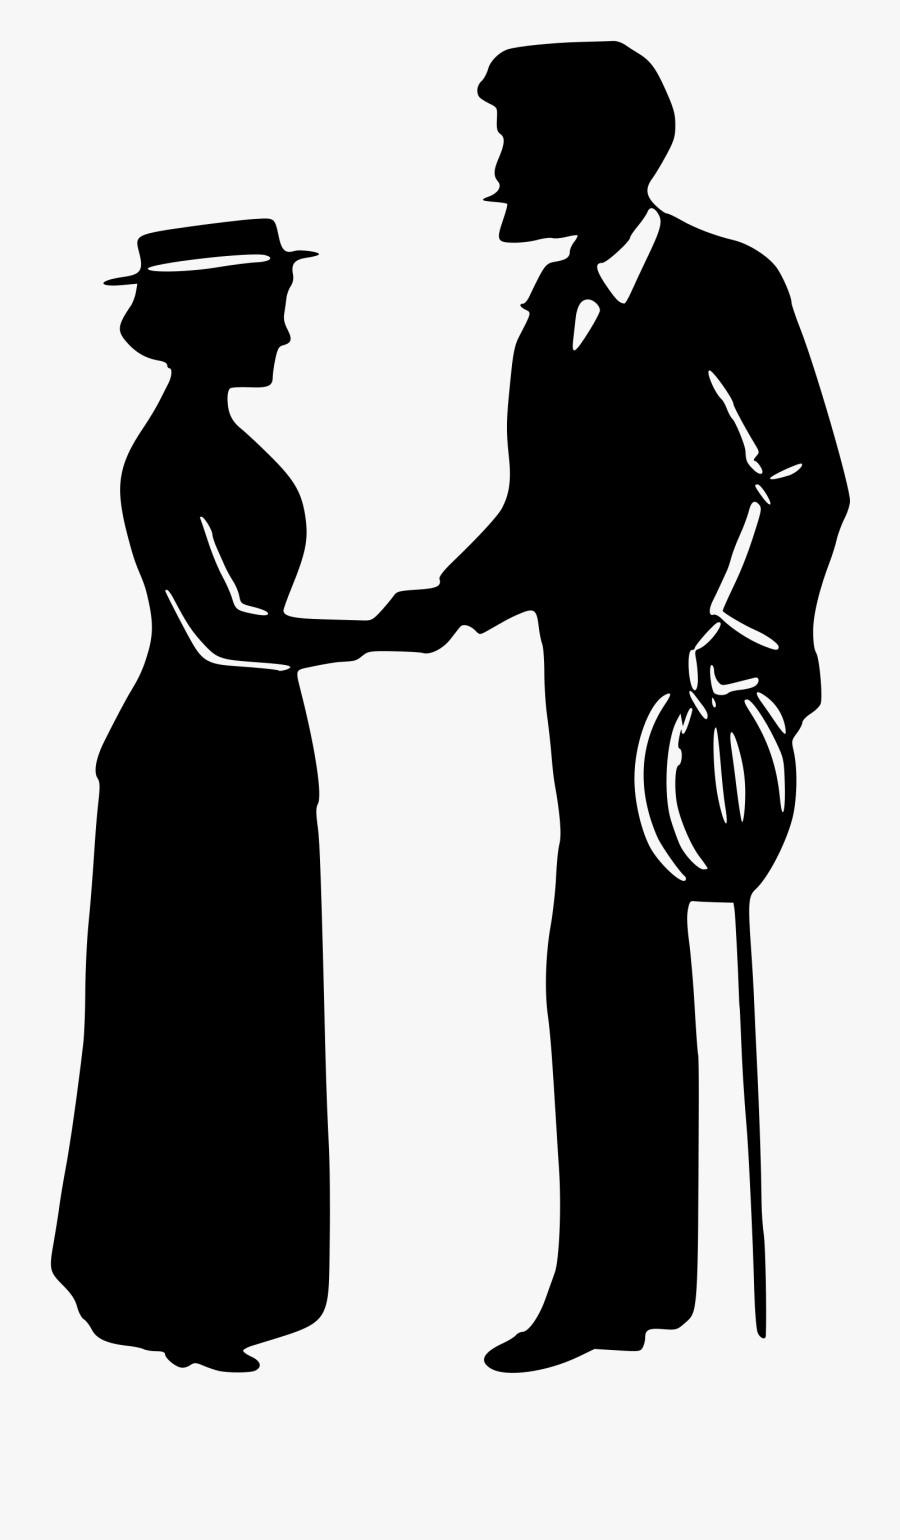 Handshake Clipart Silhouette - Man And Woman Shaking Hands Silhouette, Transparent Clipart